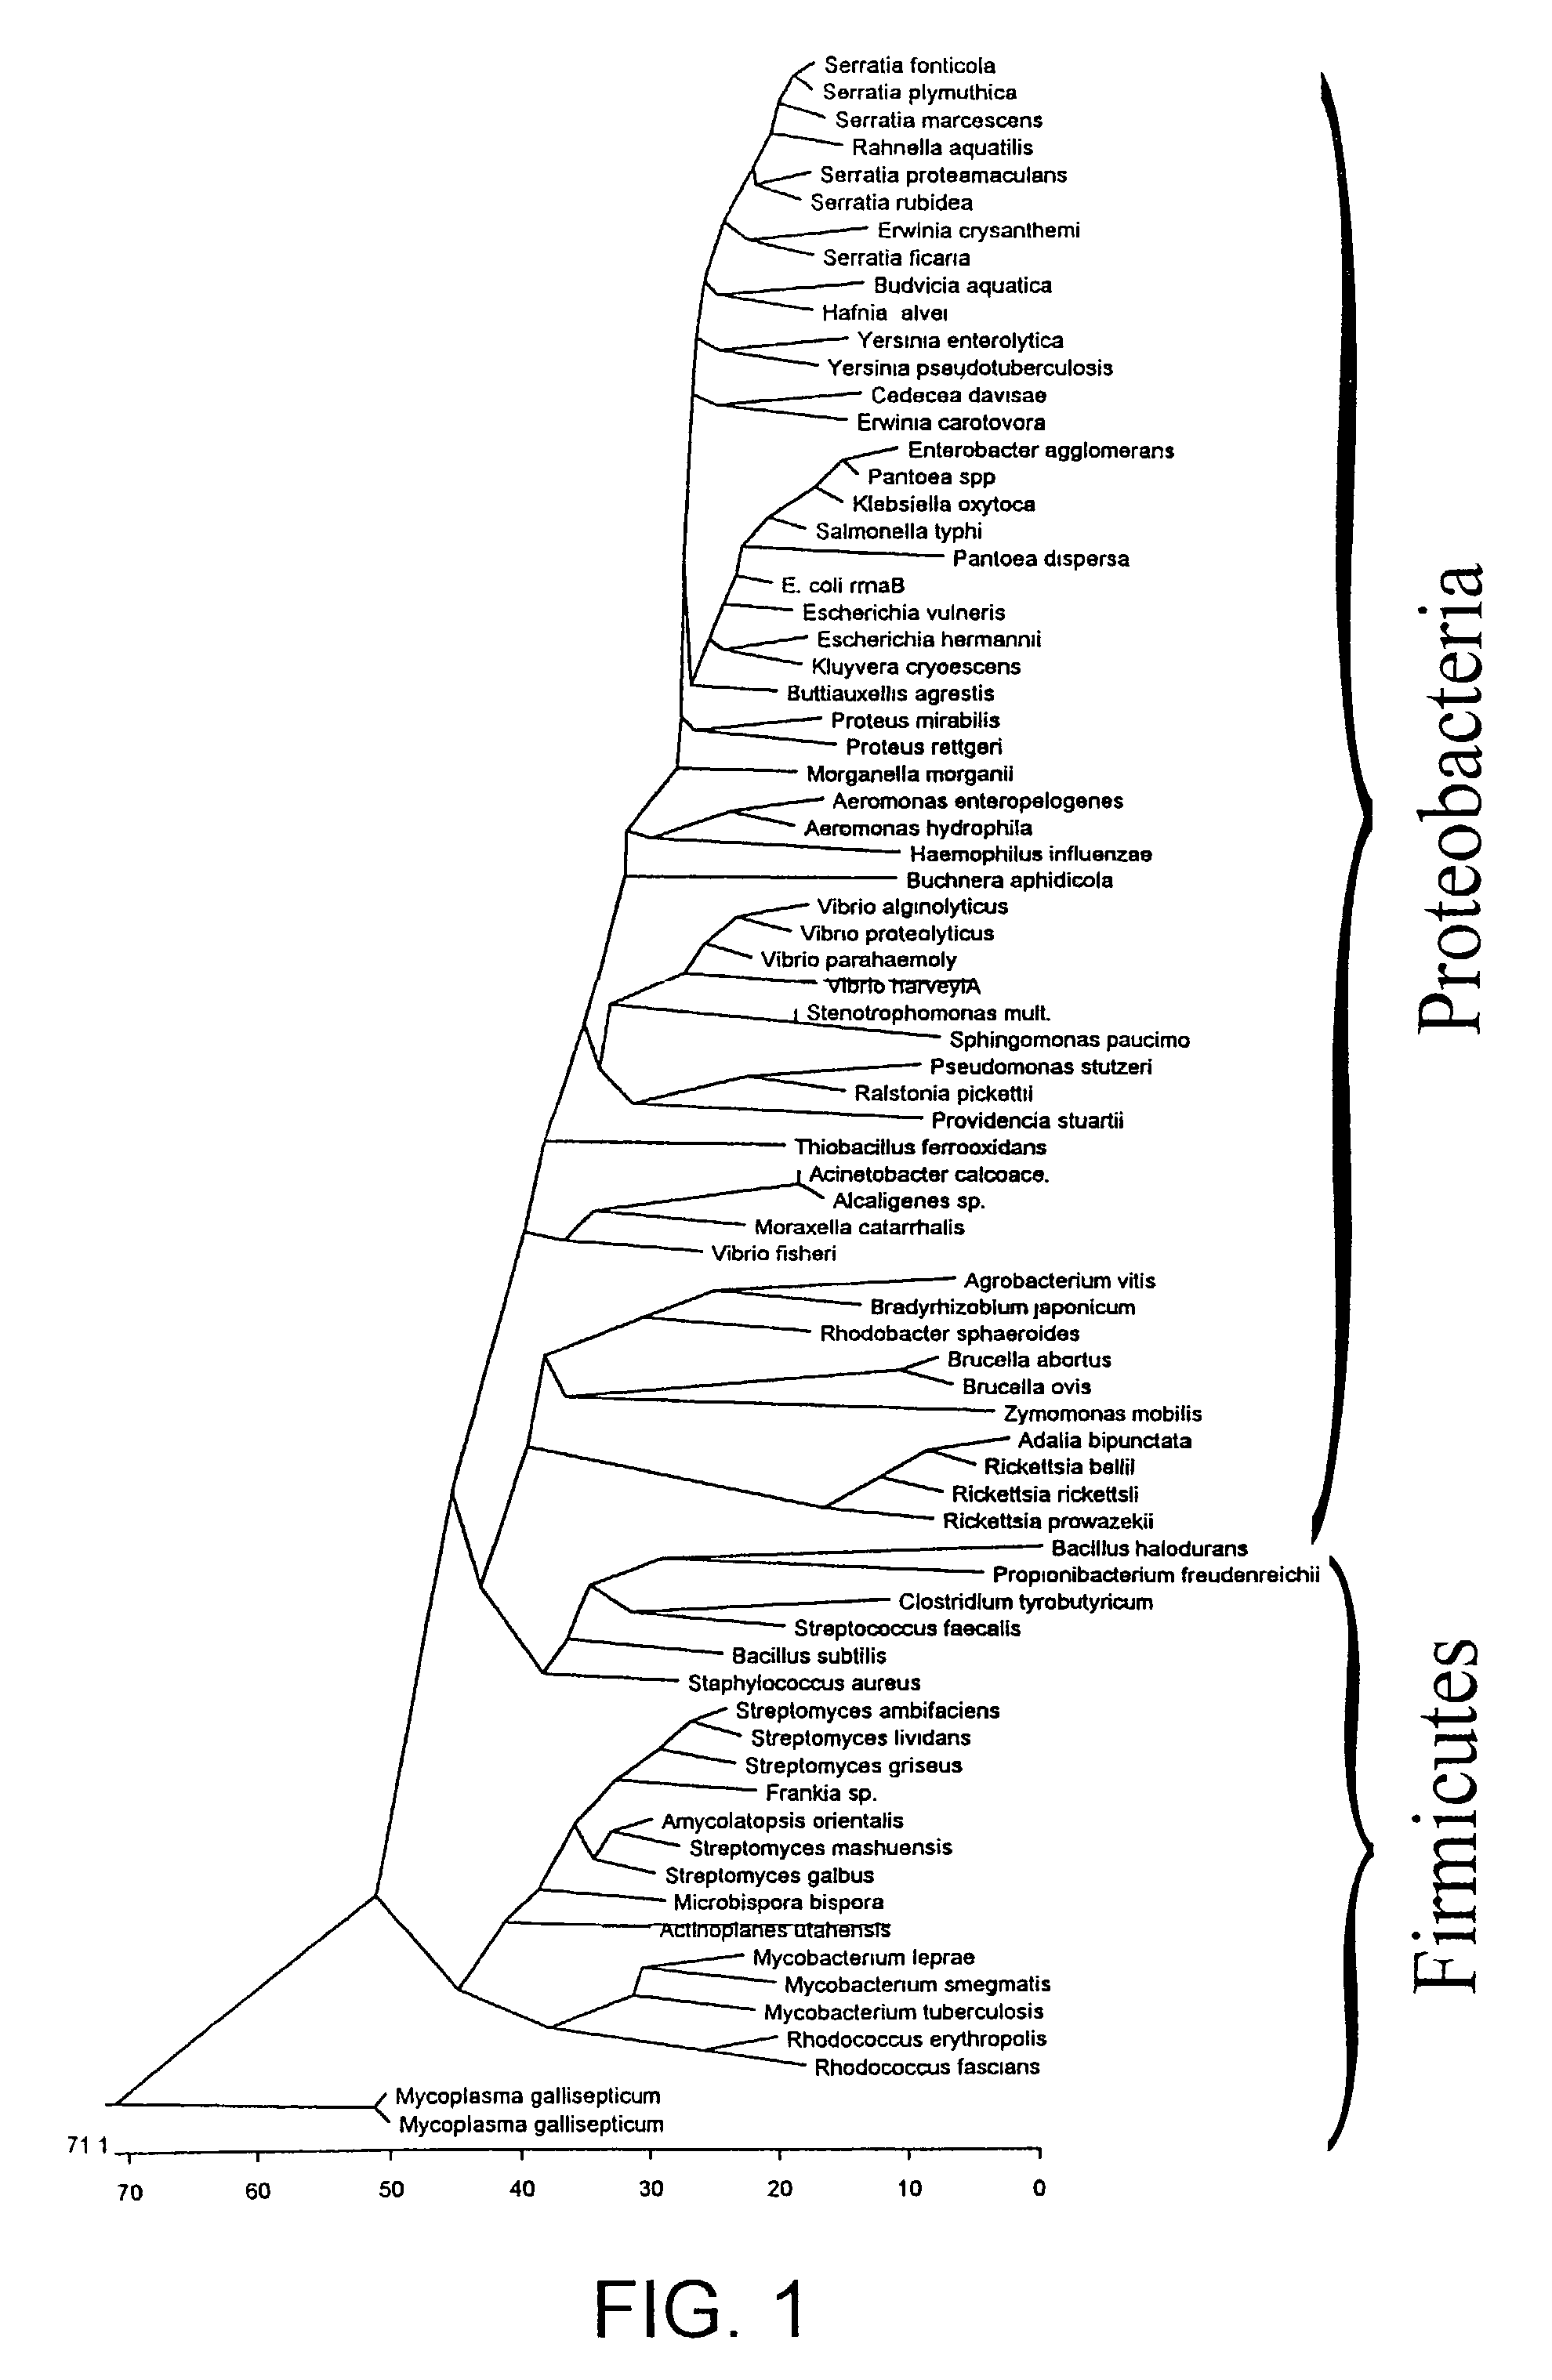 Nucleic acid molecules for detecting bacteria and phylogenetic units of bacteria